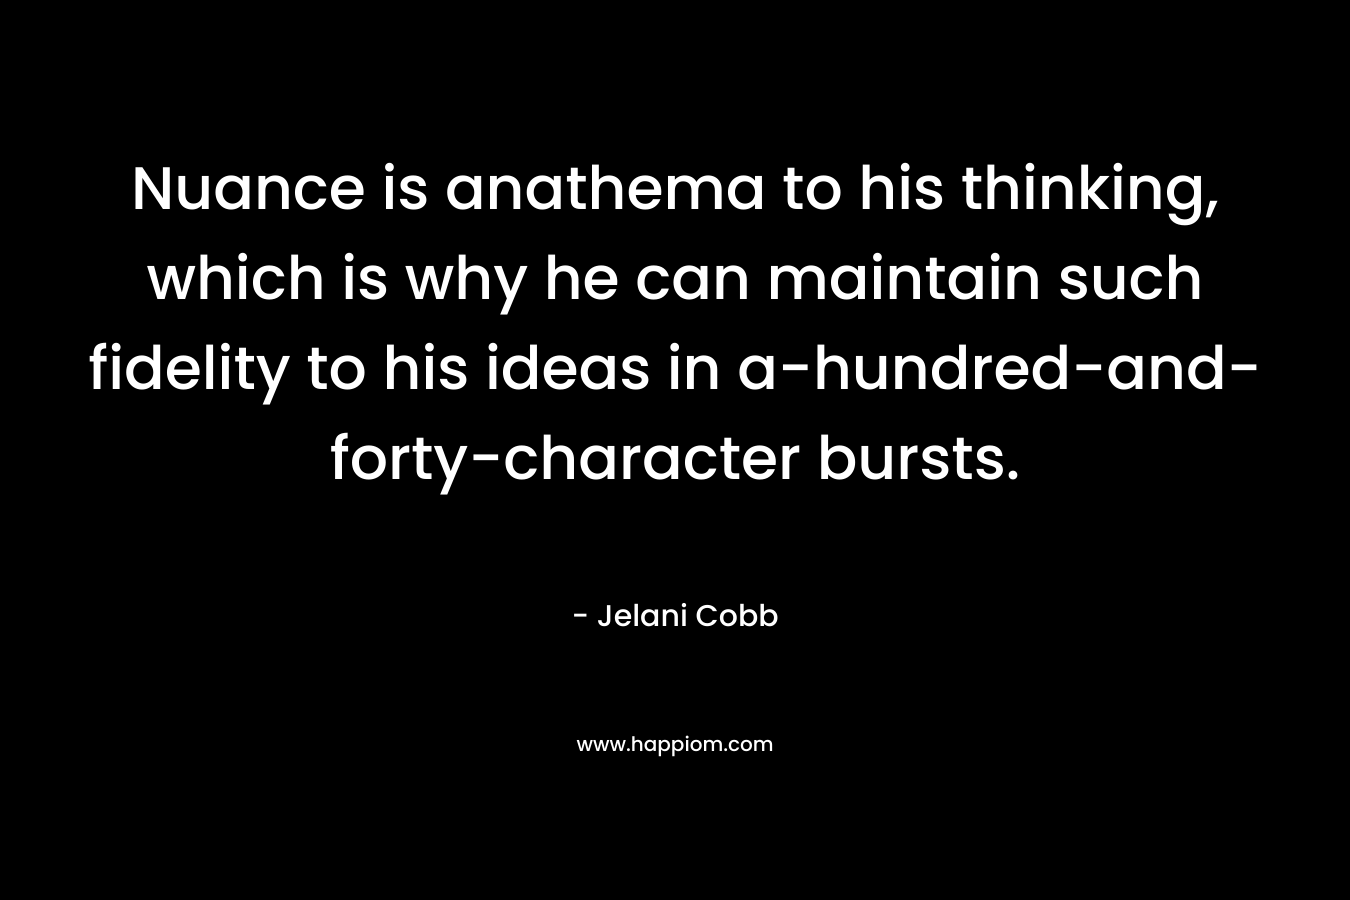 Nuance is anathema to his thinking, which is why he can maintain such fidelity to his ideas in a-hundred-and-forty-character bursts.